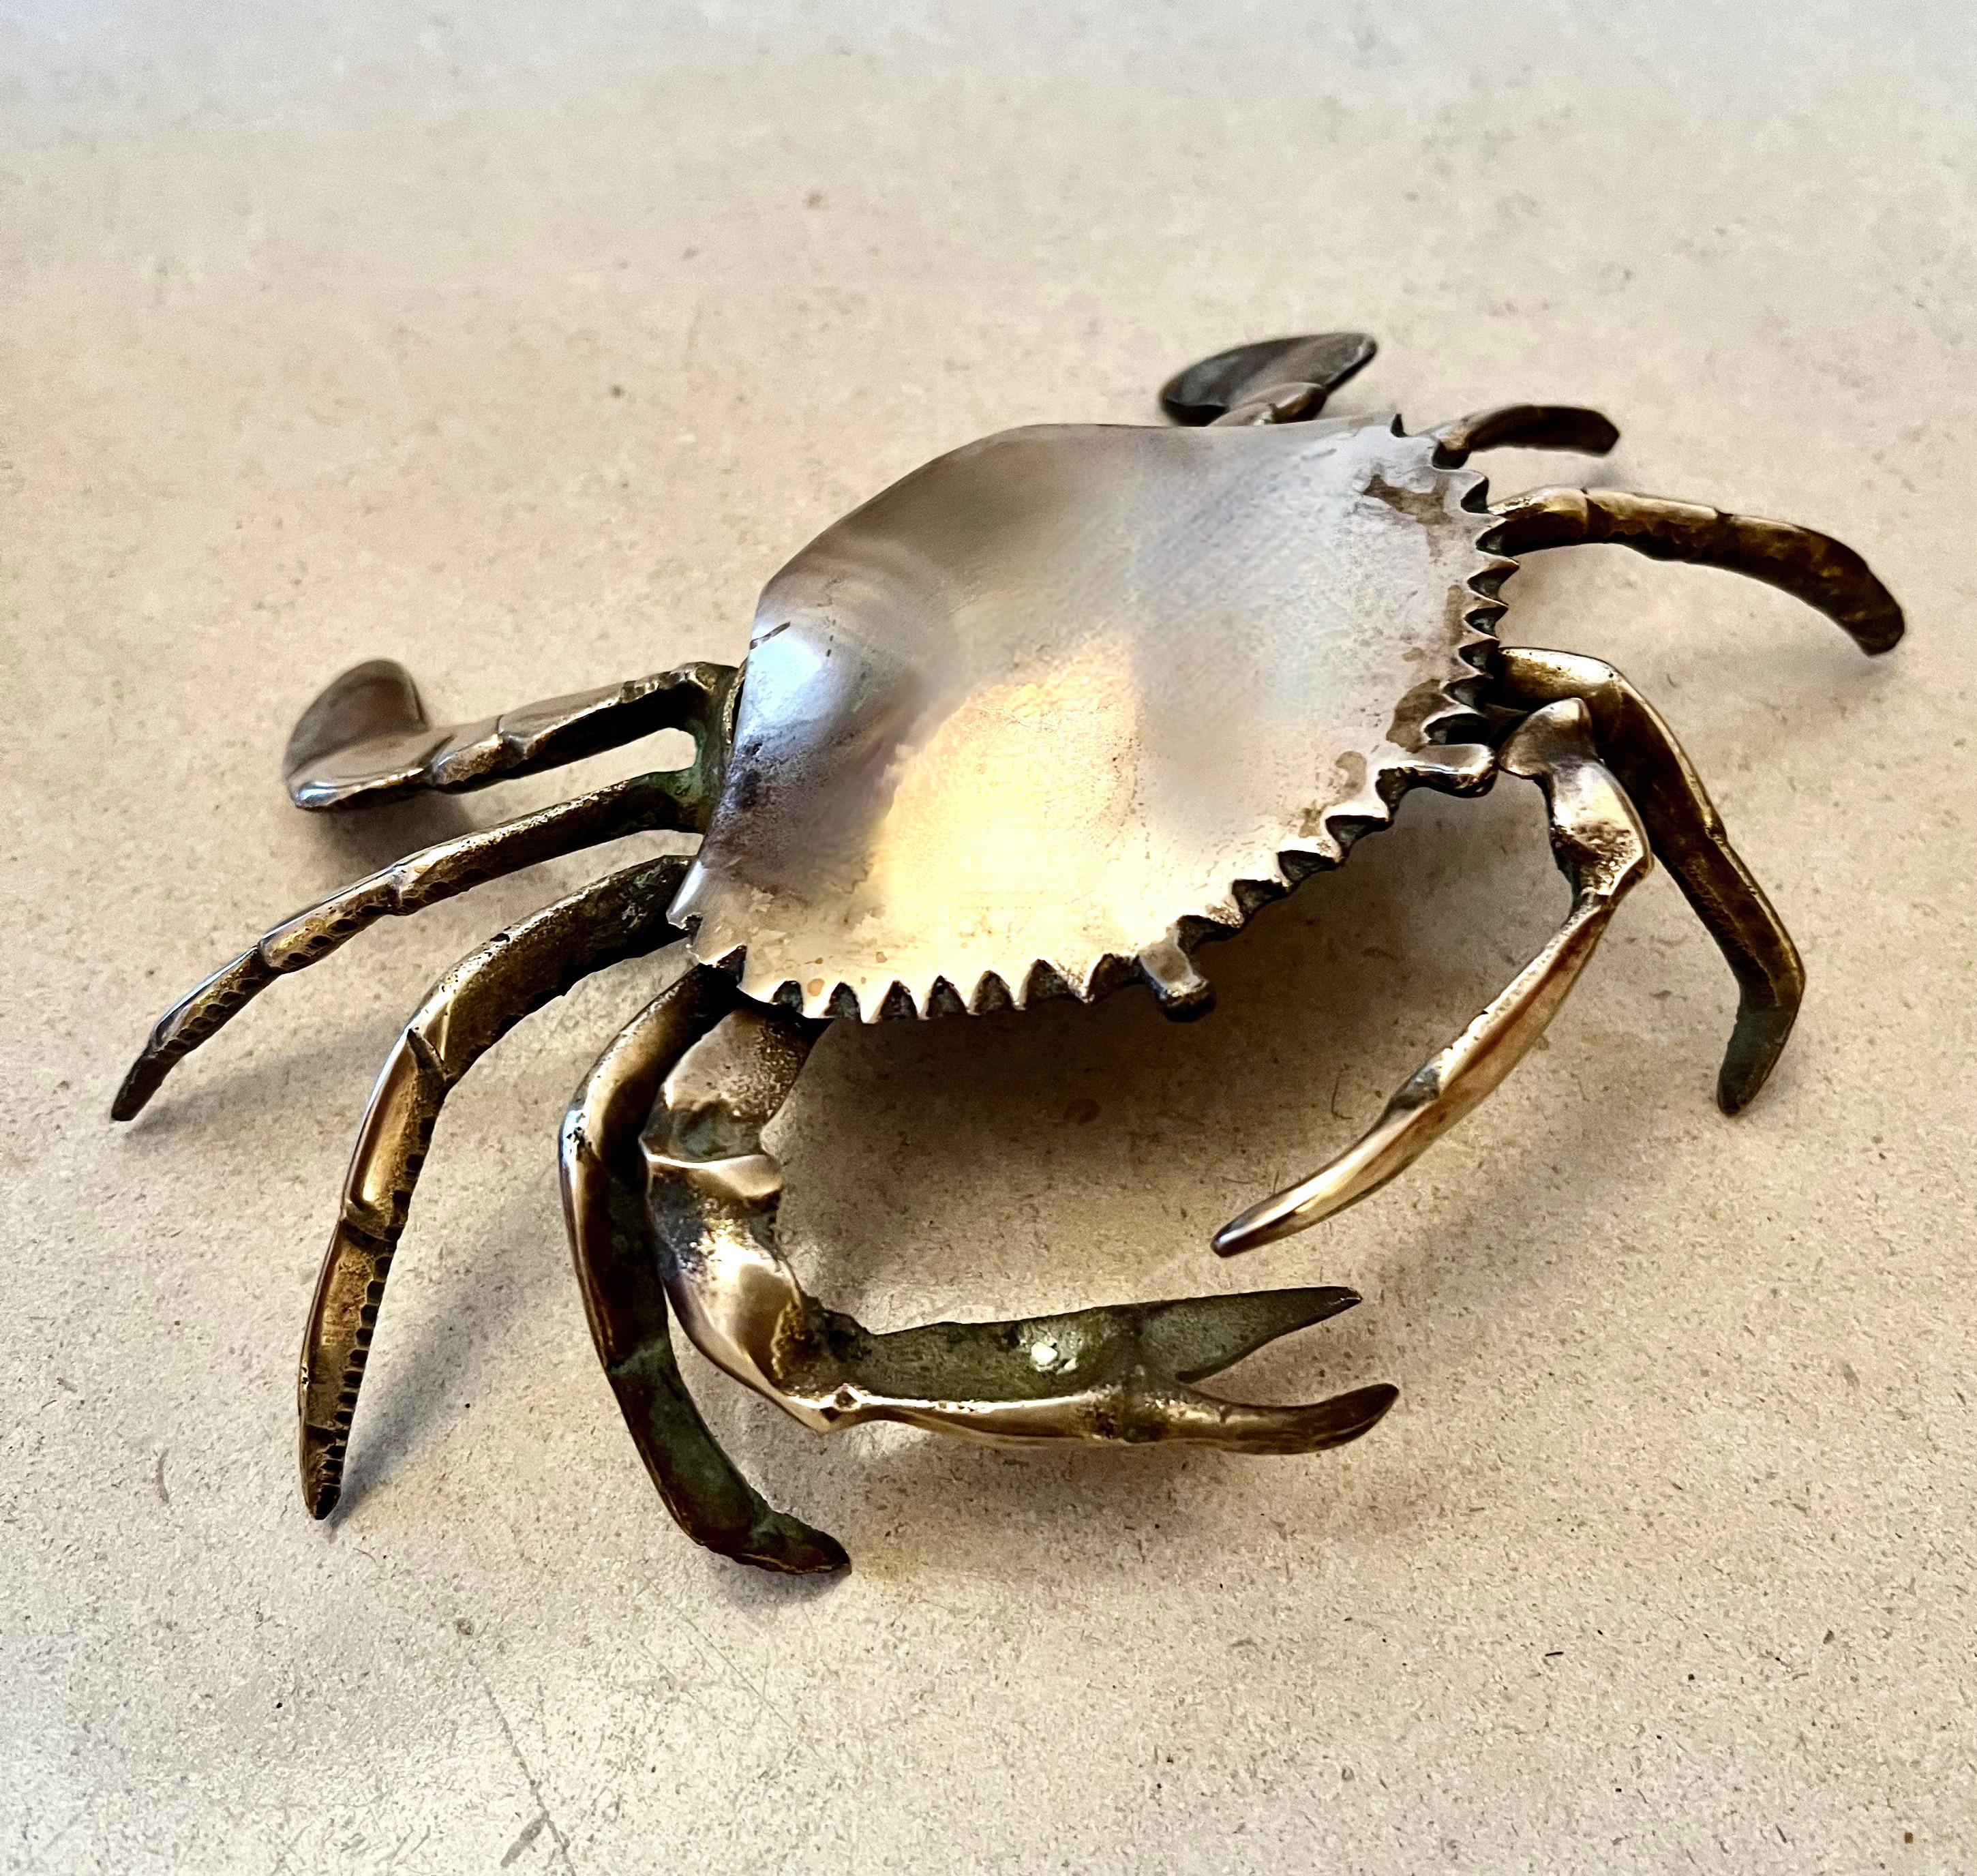 Brass Crab Ashtray or 420 Holder In Good Condition For Sale In Los Angeles, CA